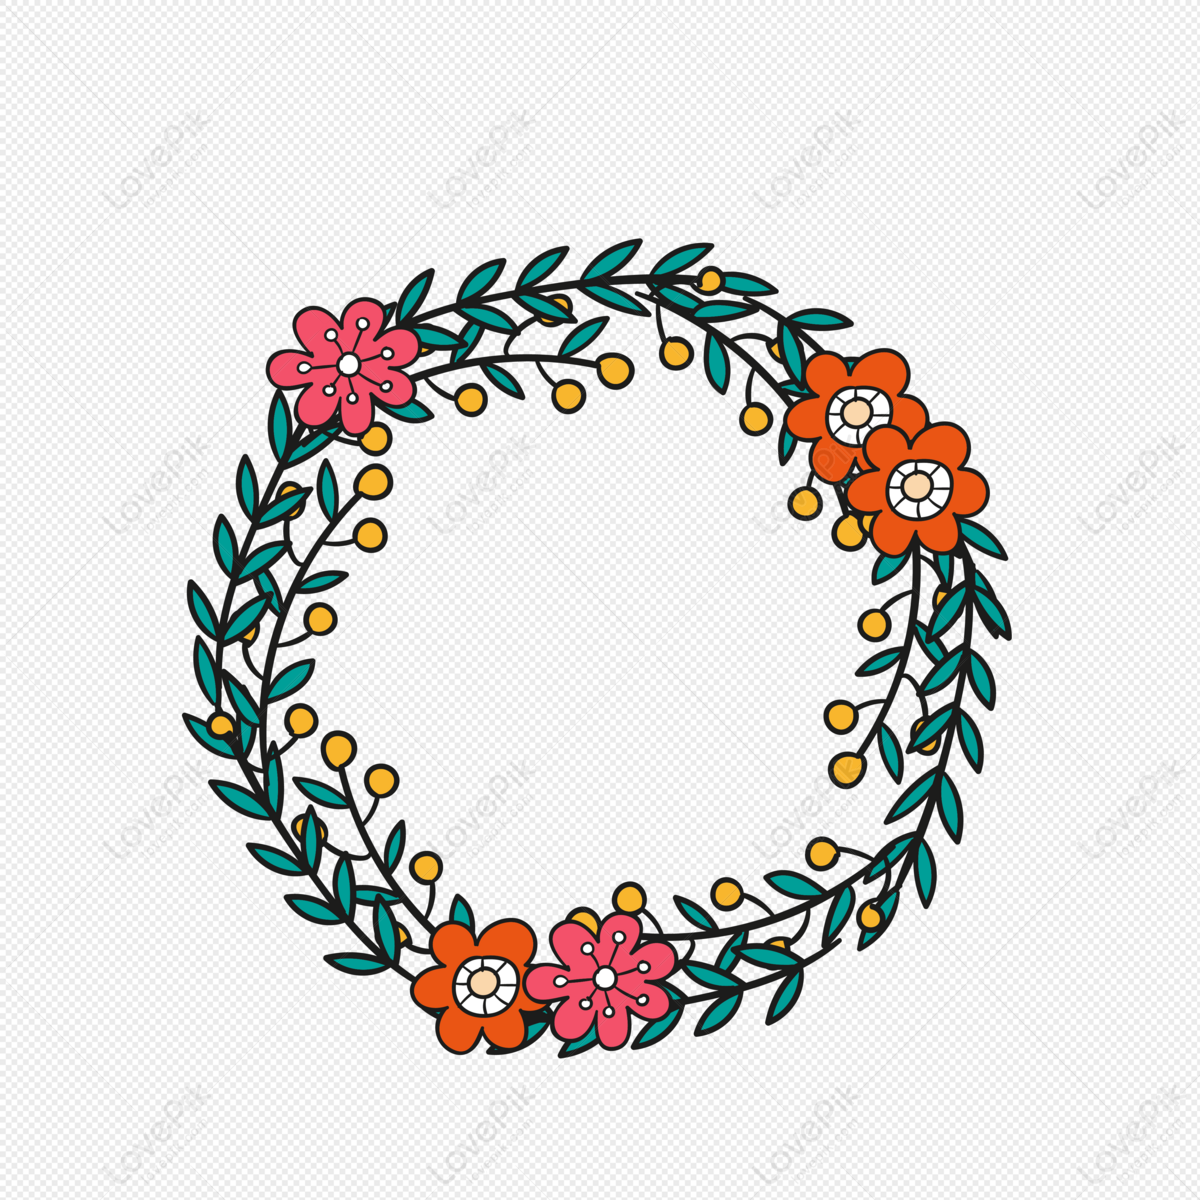 Small Fresh Floral Border Vector Png Picture And Clipart Image For Free  Download - Lovepik | 401461015